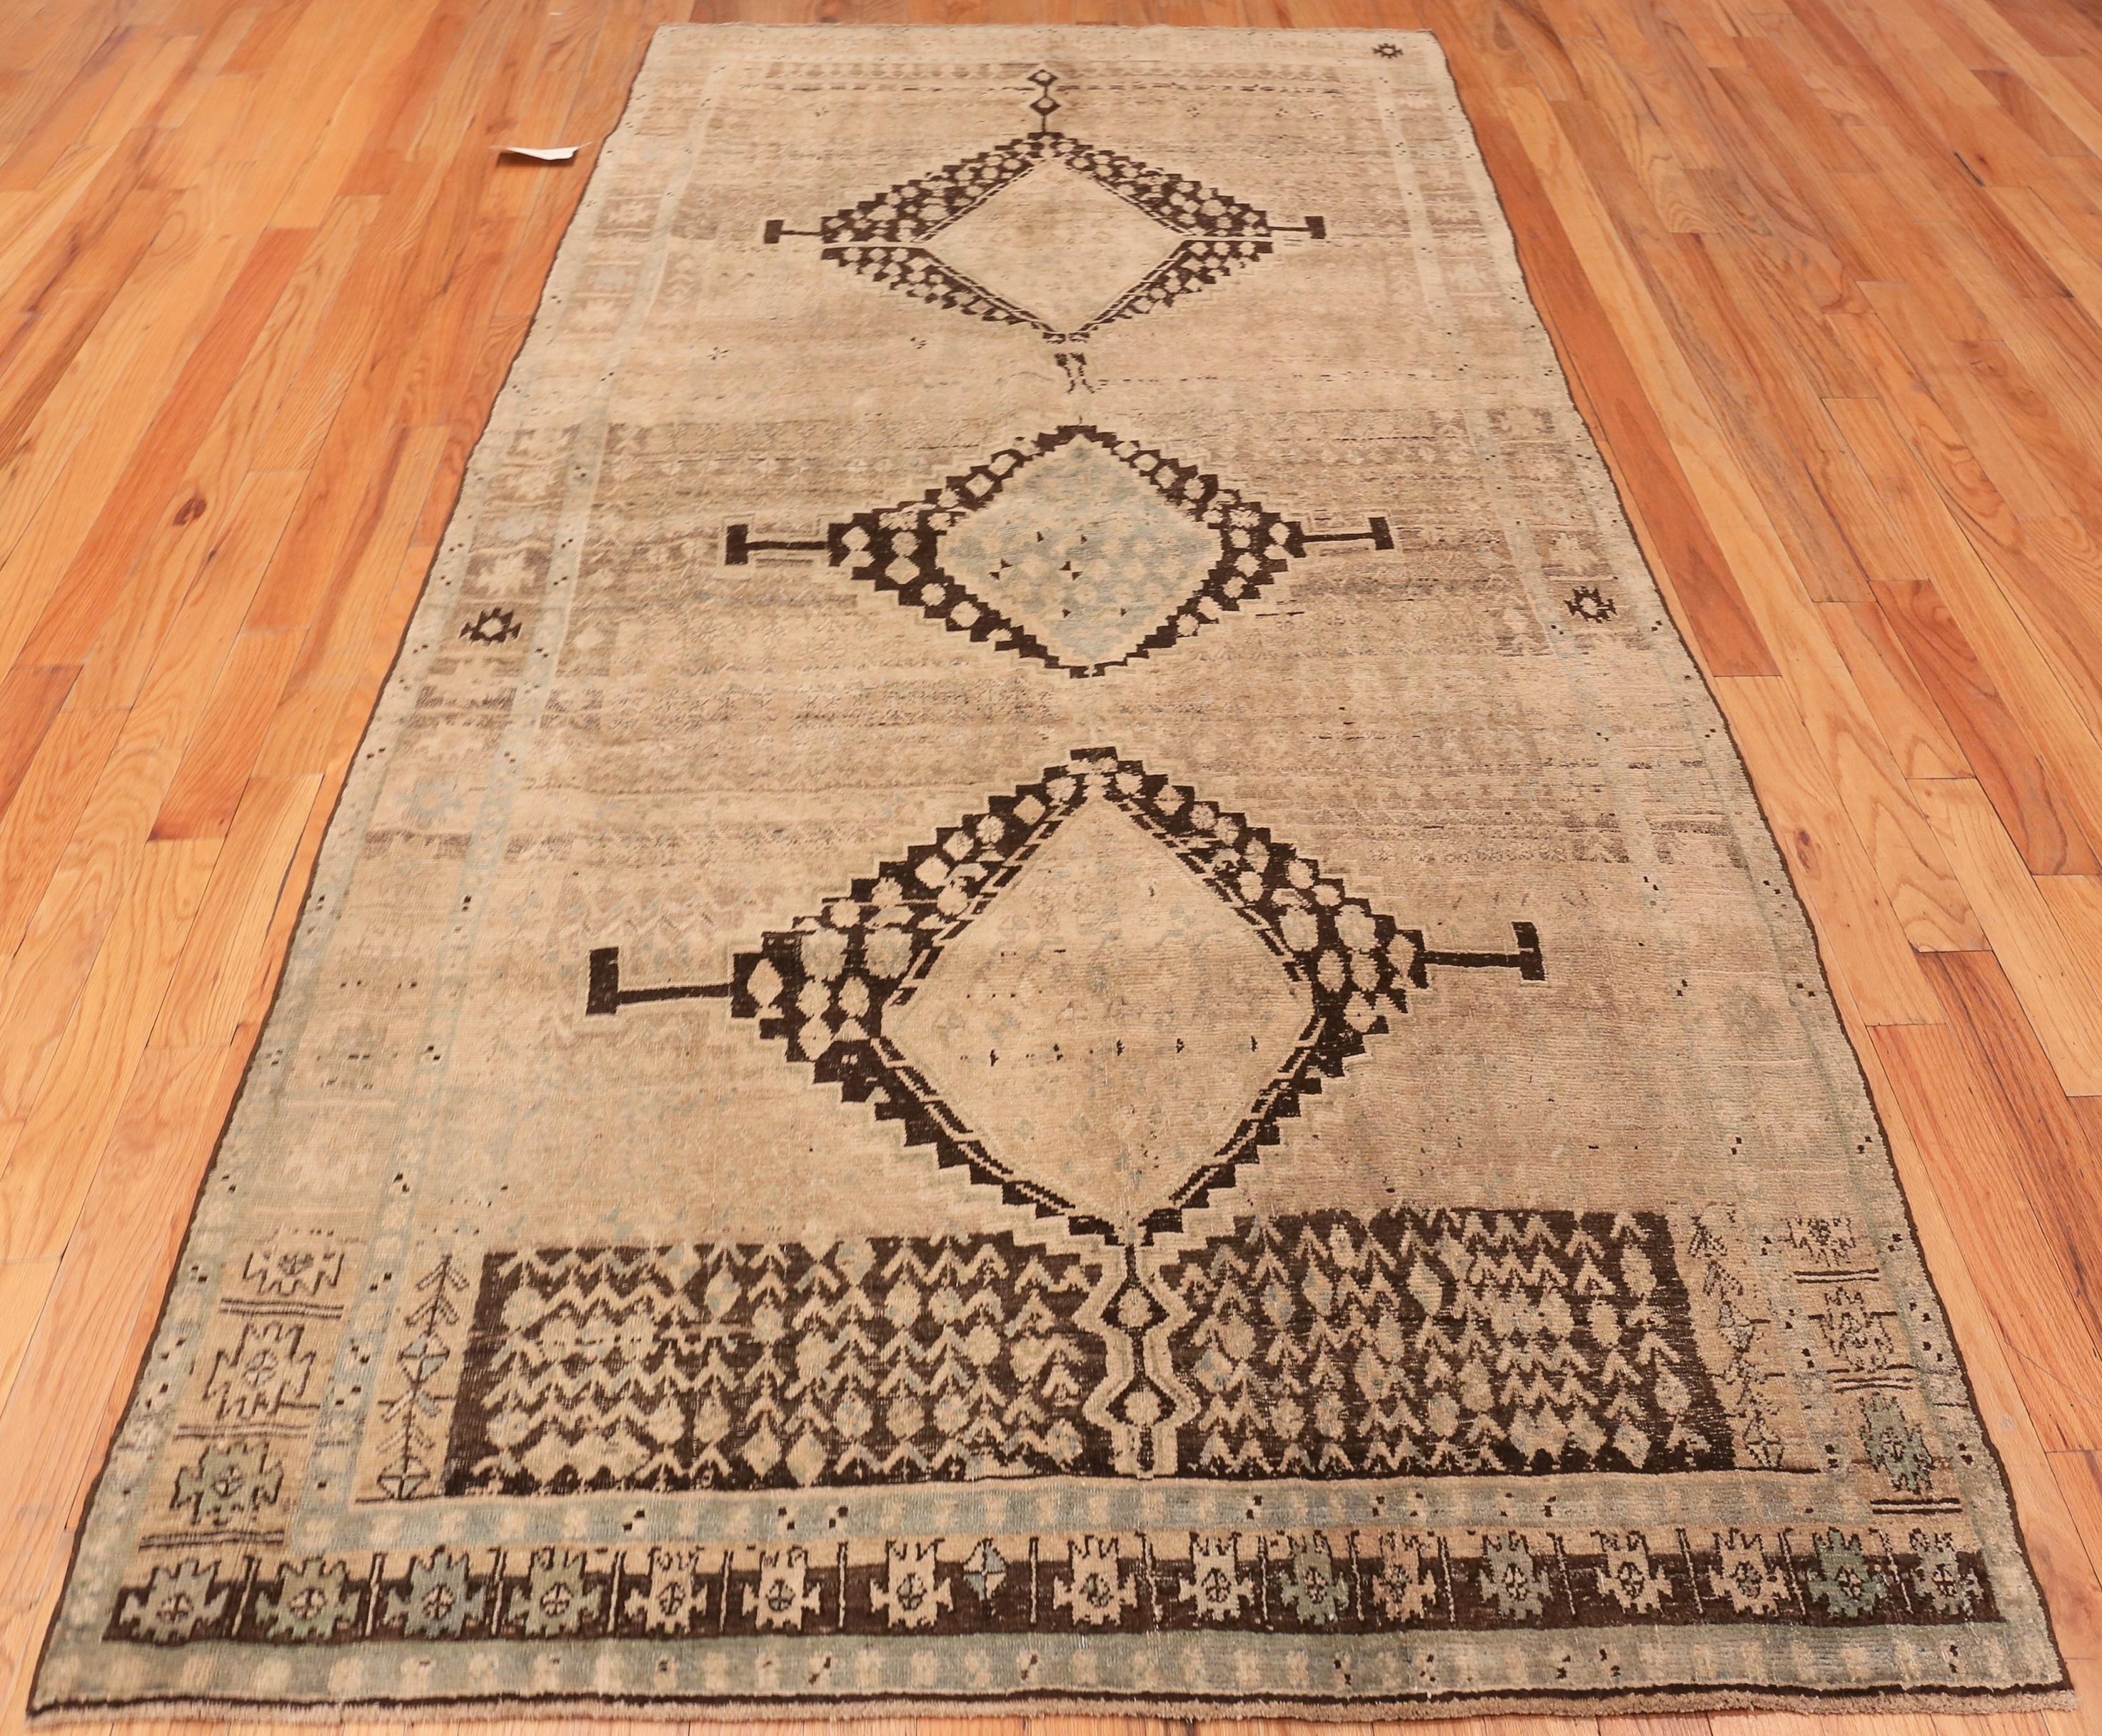 Hand-Knotted Gallery Size Antique Persian Bidjar Rug 5 ft x 10 ft (1.52 m x 3.05 m)